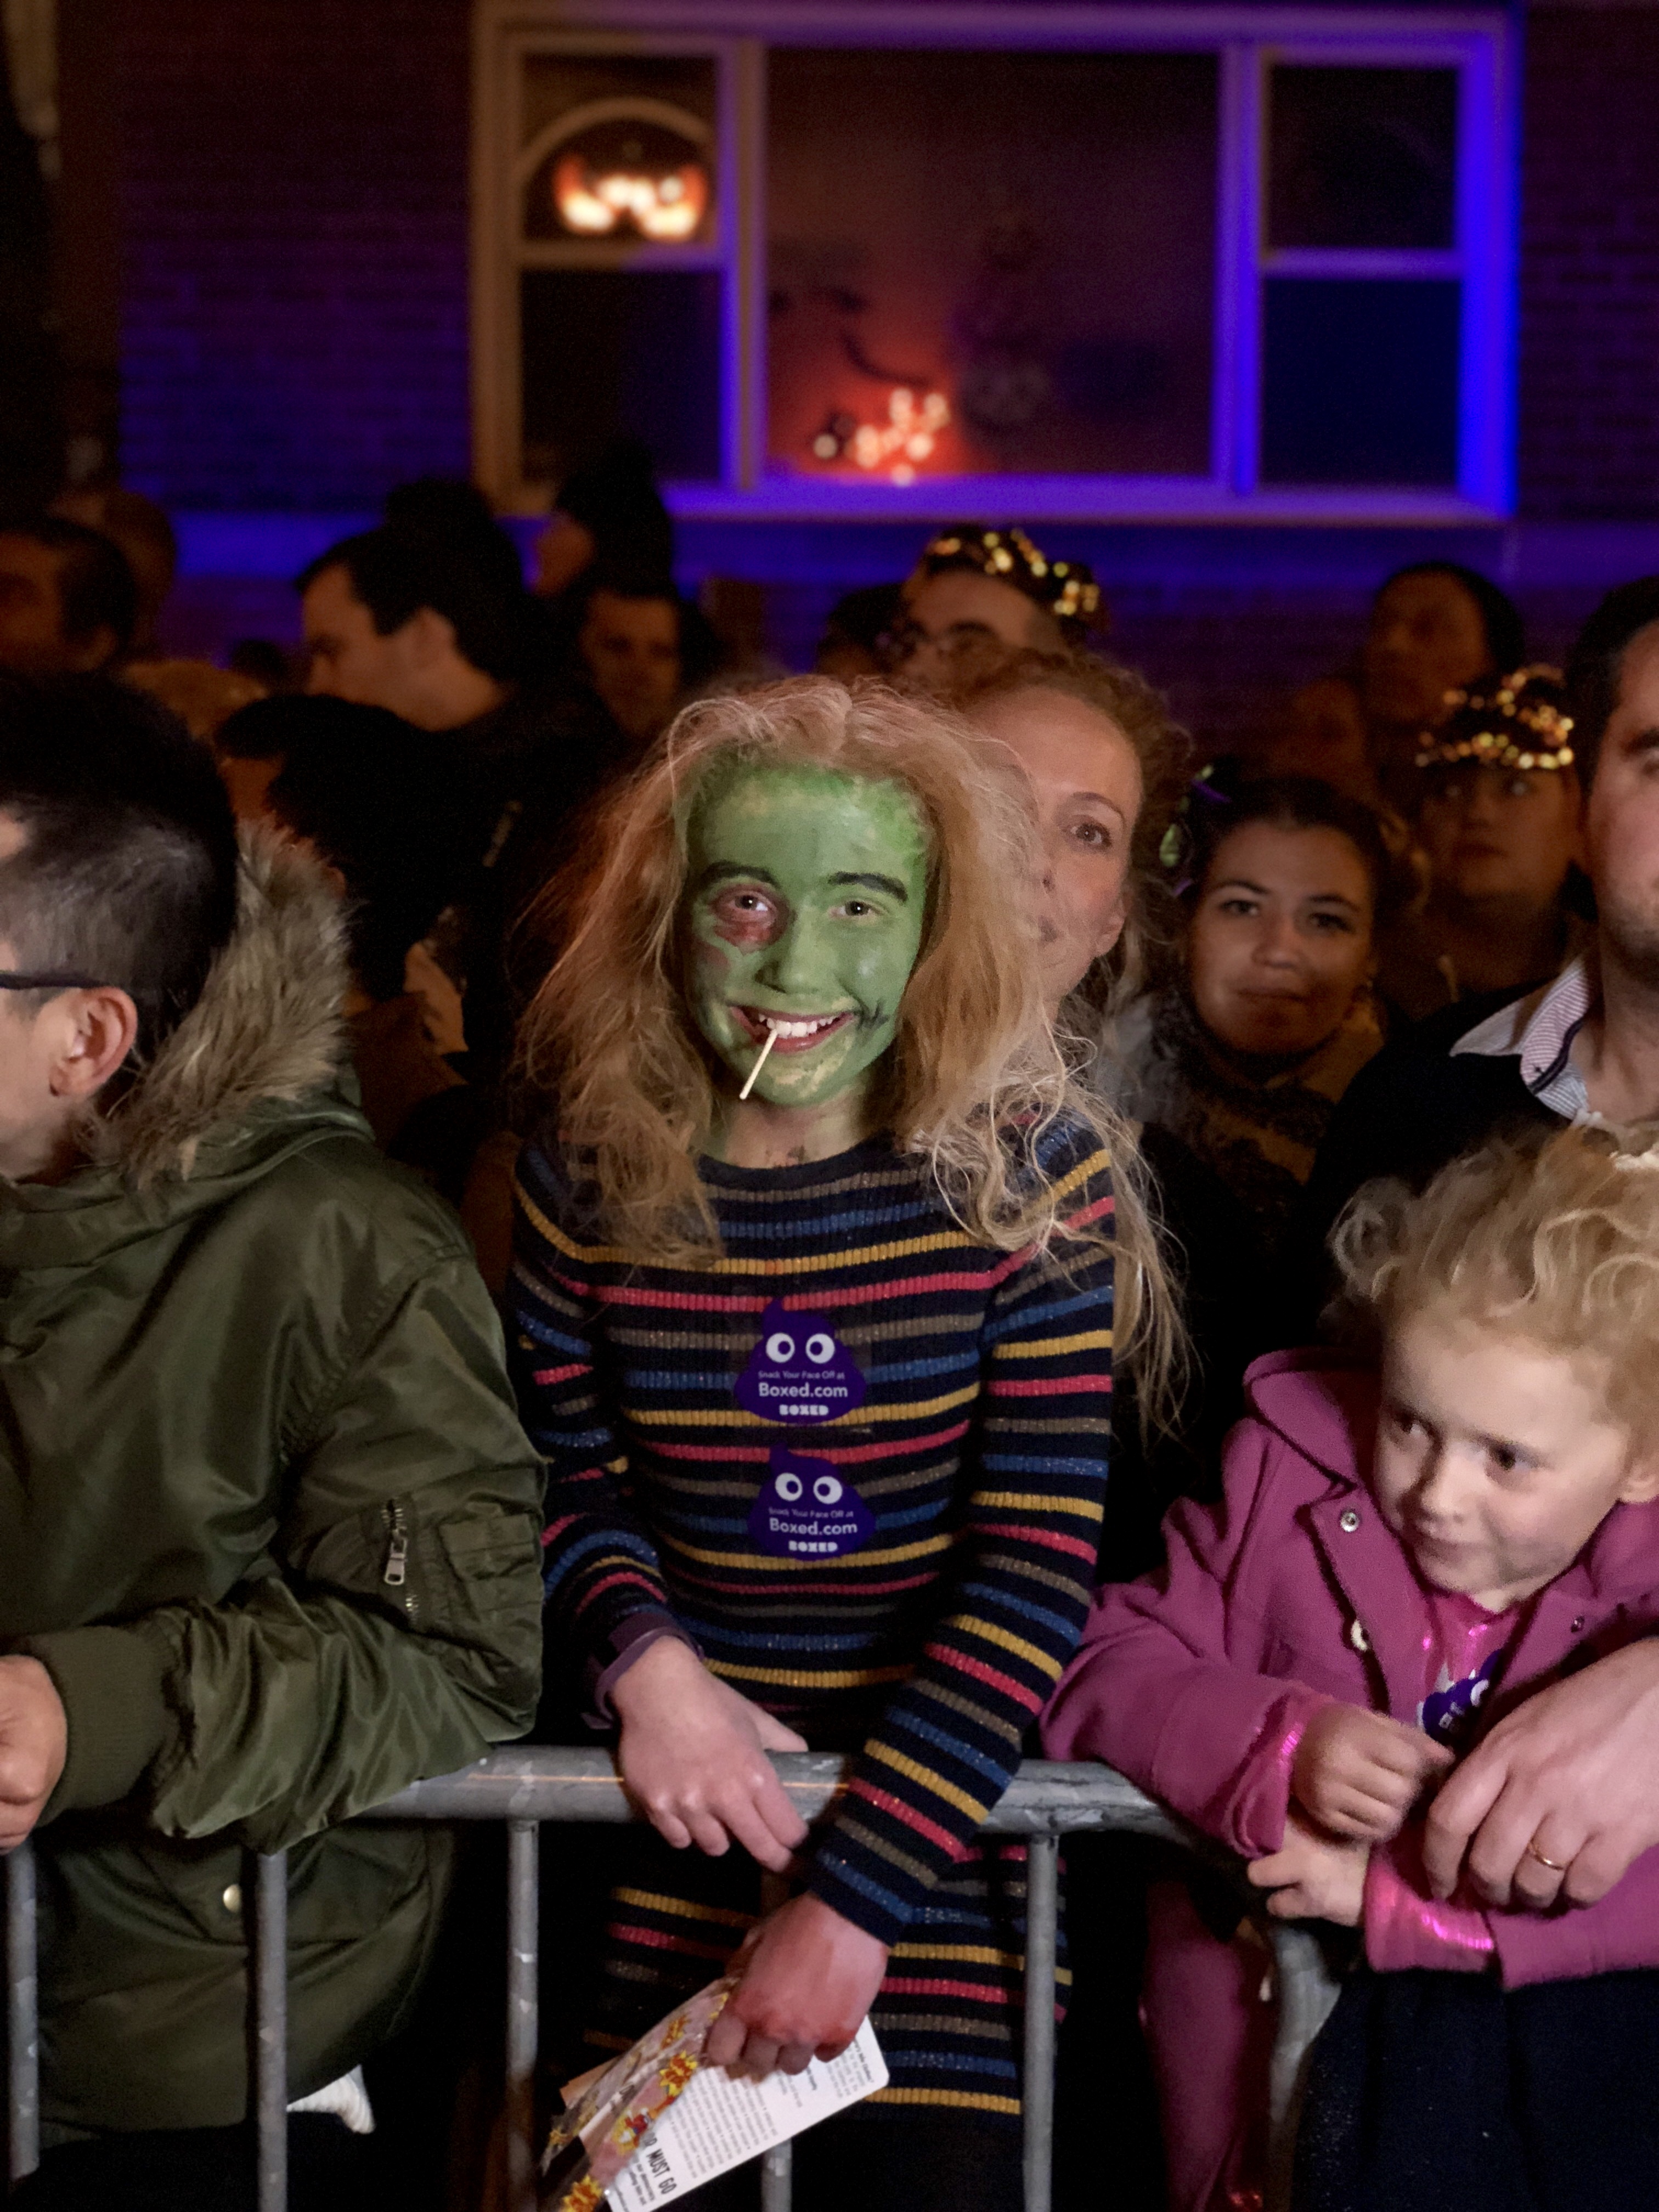 Freya Hobbs and her family watch the Village Halloween Parade in New York City on Oct. 31, 2017. (Delphine Diallo For TIME)